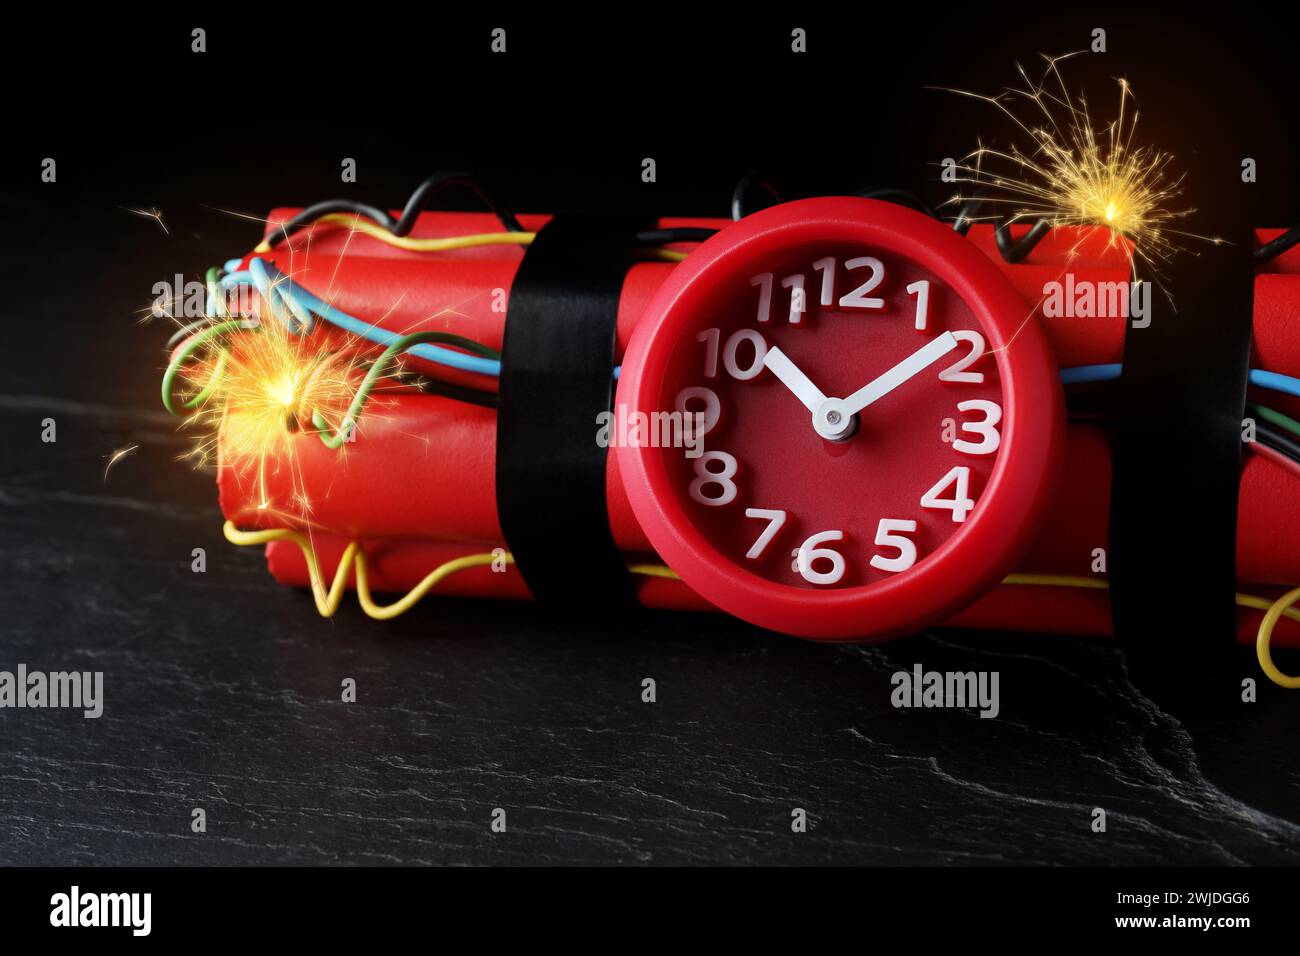 Dynamite time bomb with burning wires on black table, closeup Stock Photo